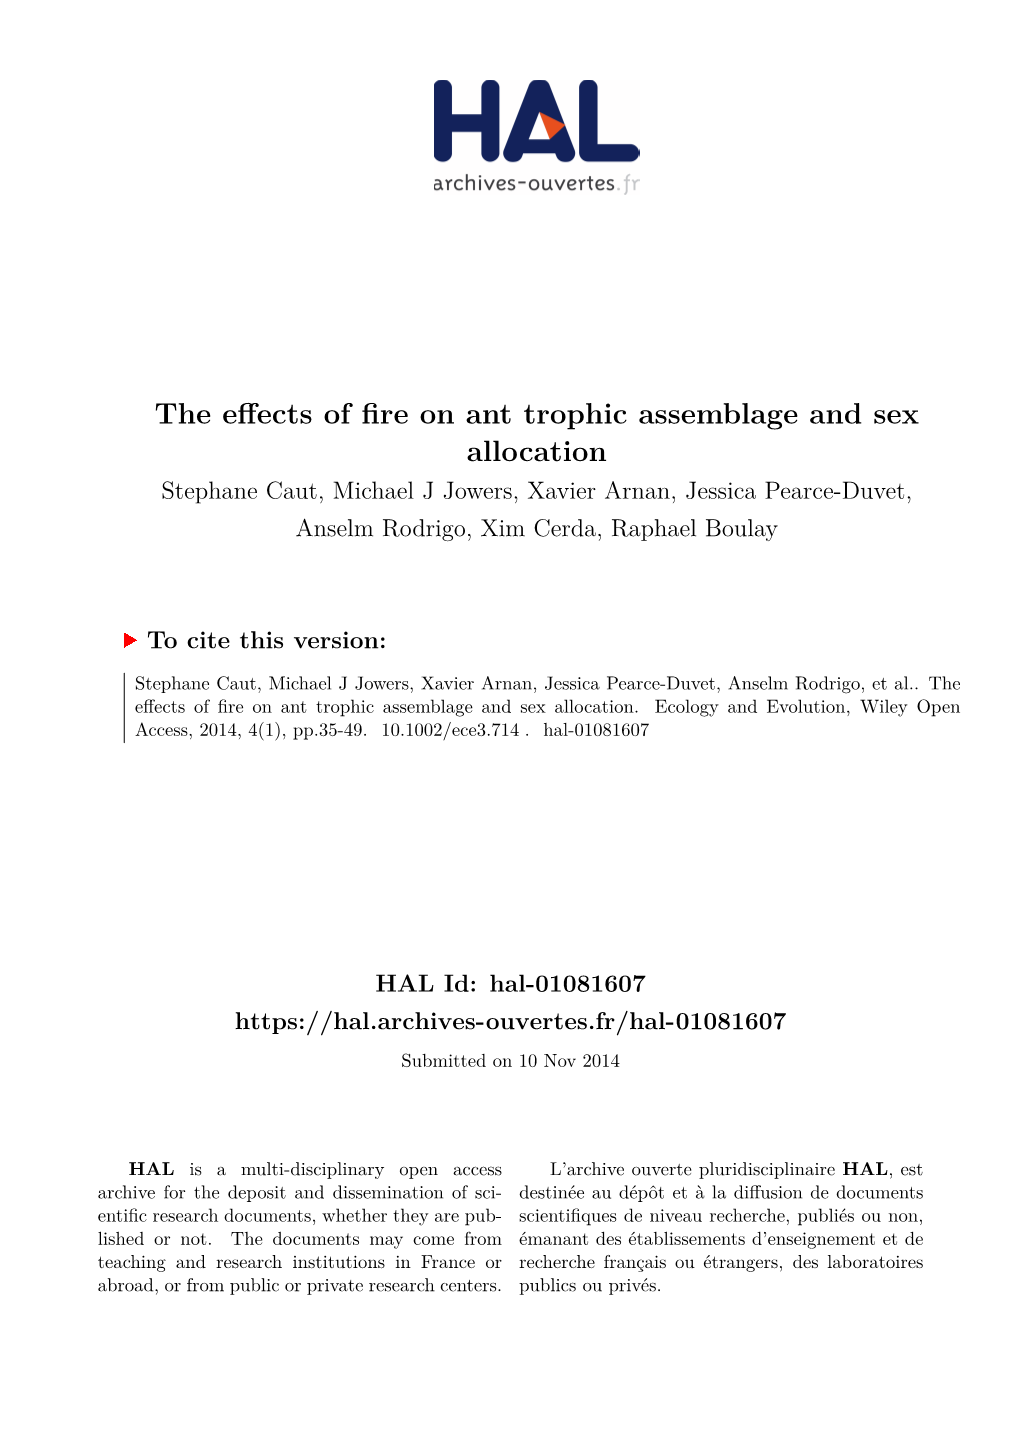 The Effects of Fire on Ant Trophic Assemblage and Sex Allocation